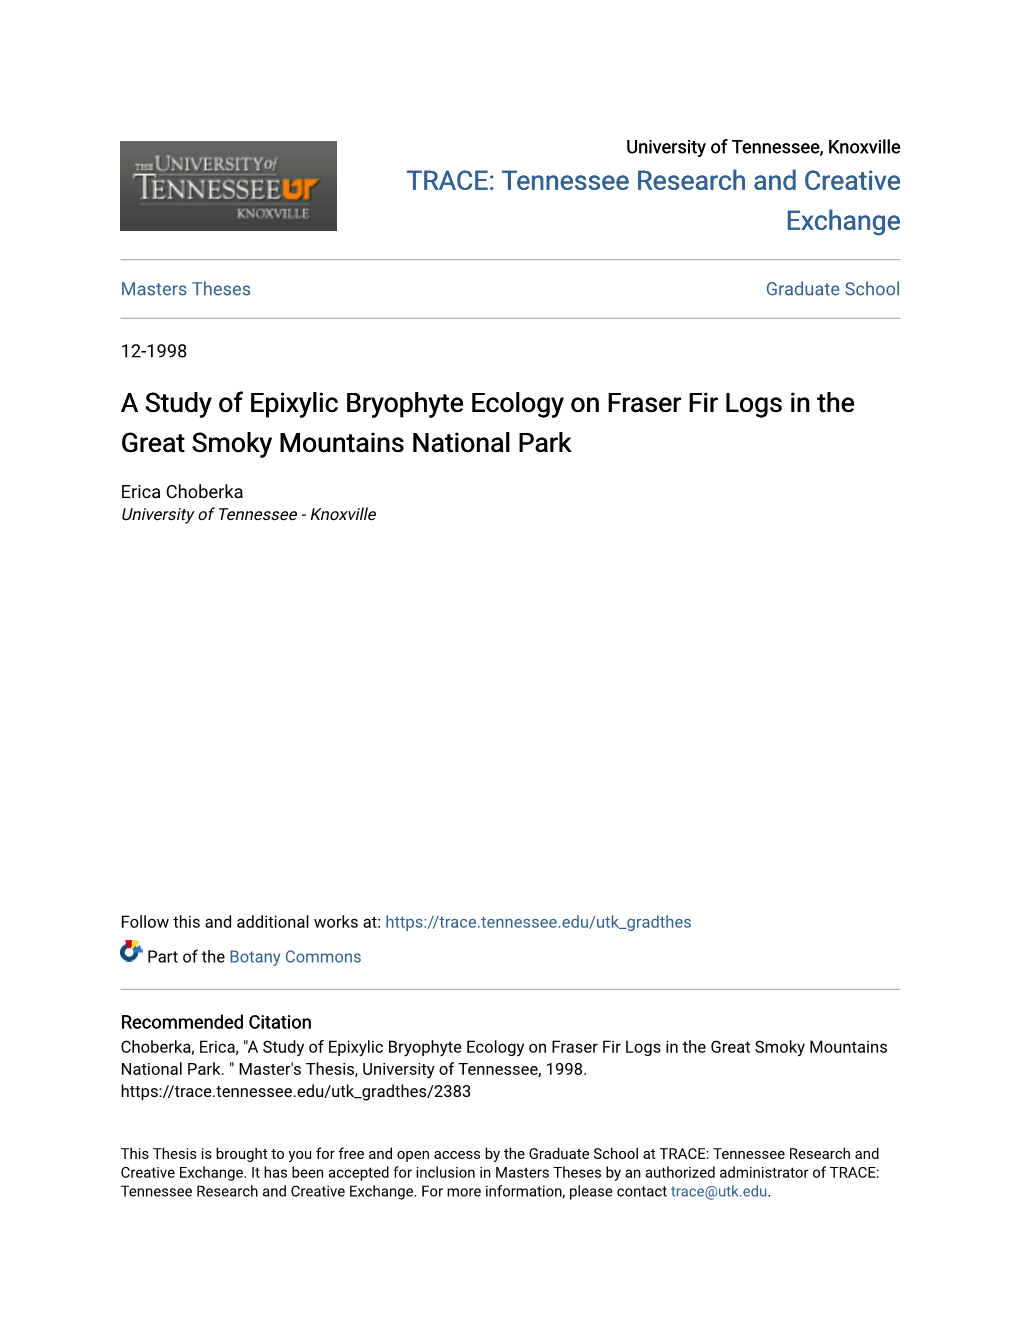 A Study of Epixylic Bryophyte Ecology on Fraser Fir Logs in the Great Smoky Mountains National Park